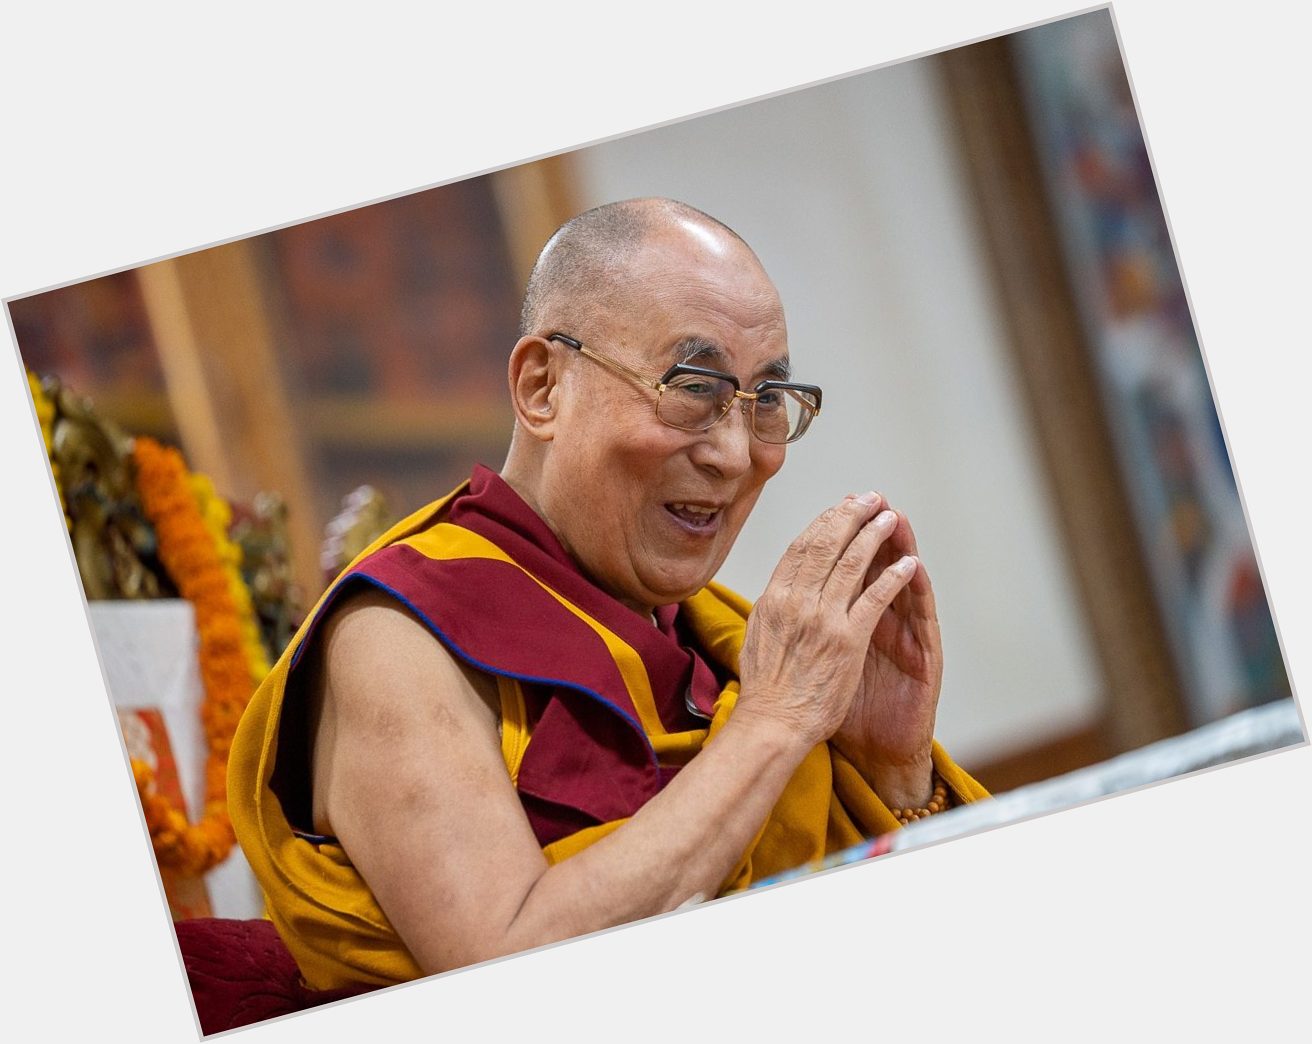 A Most Happy and Auspicious Birthday to His Holiness the Dalai Lama!  